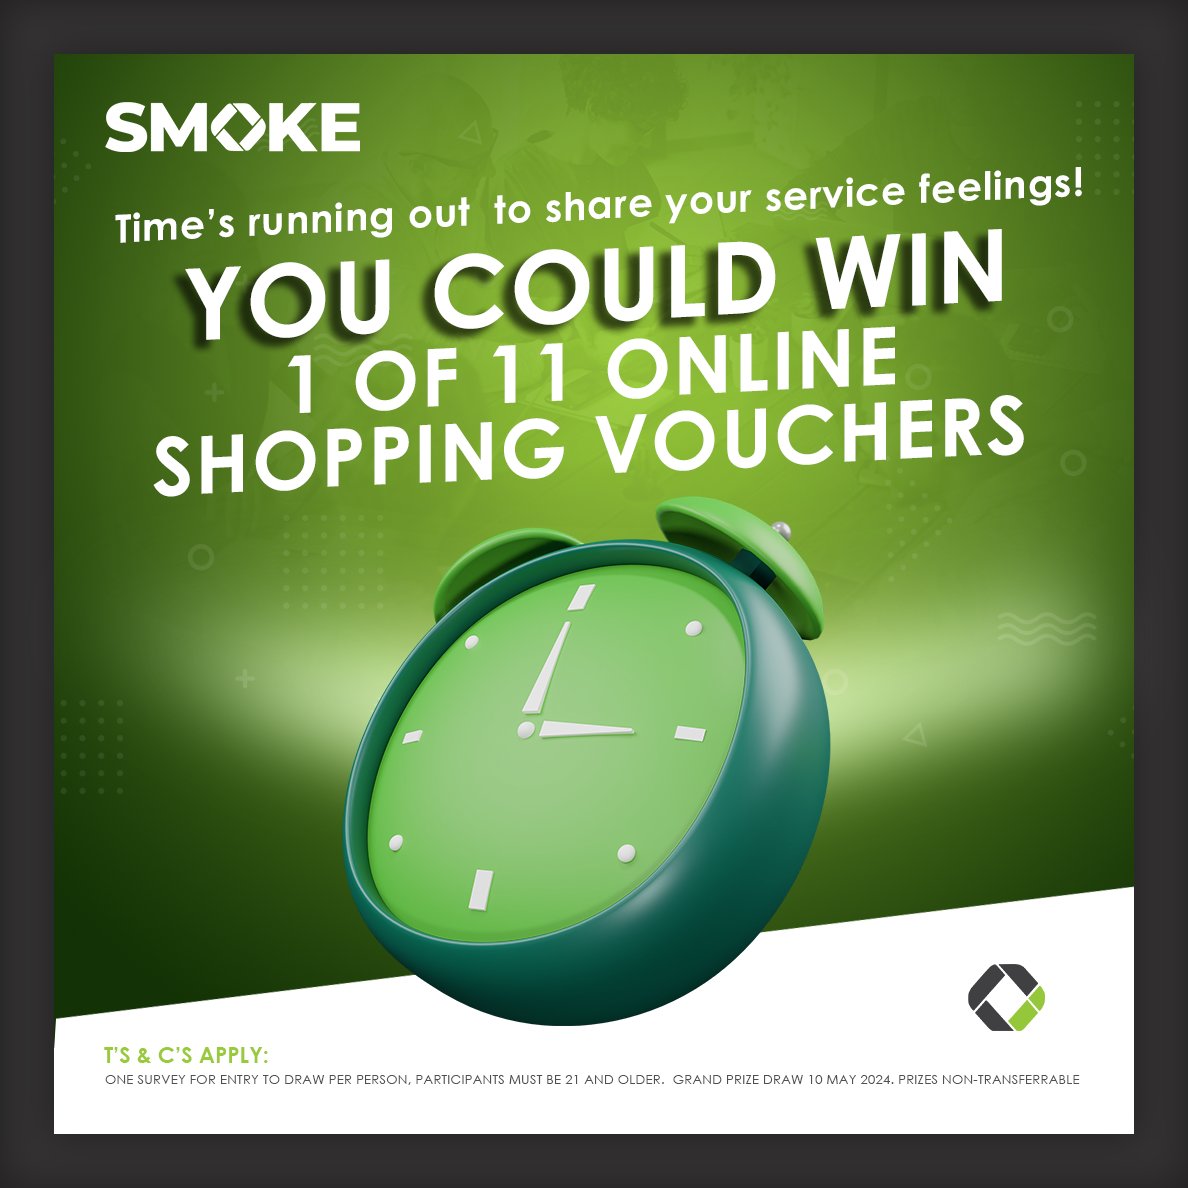 One week left! This is your last chance to complete our survey to be entered into the final draw for your share of online shopping vouchers! Tell us how service makes you feel, and you could win. 
Enter now: bit.ly/3vzyAKl
T’s & C’s Online. 
#Sharethefeeling #SmokeCI